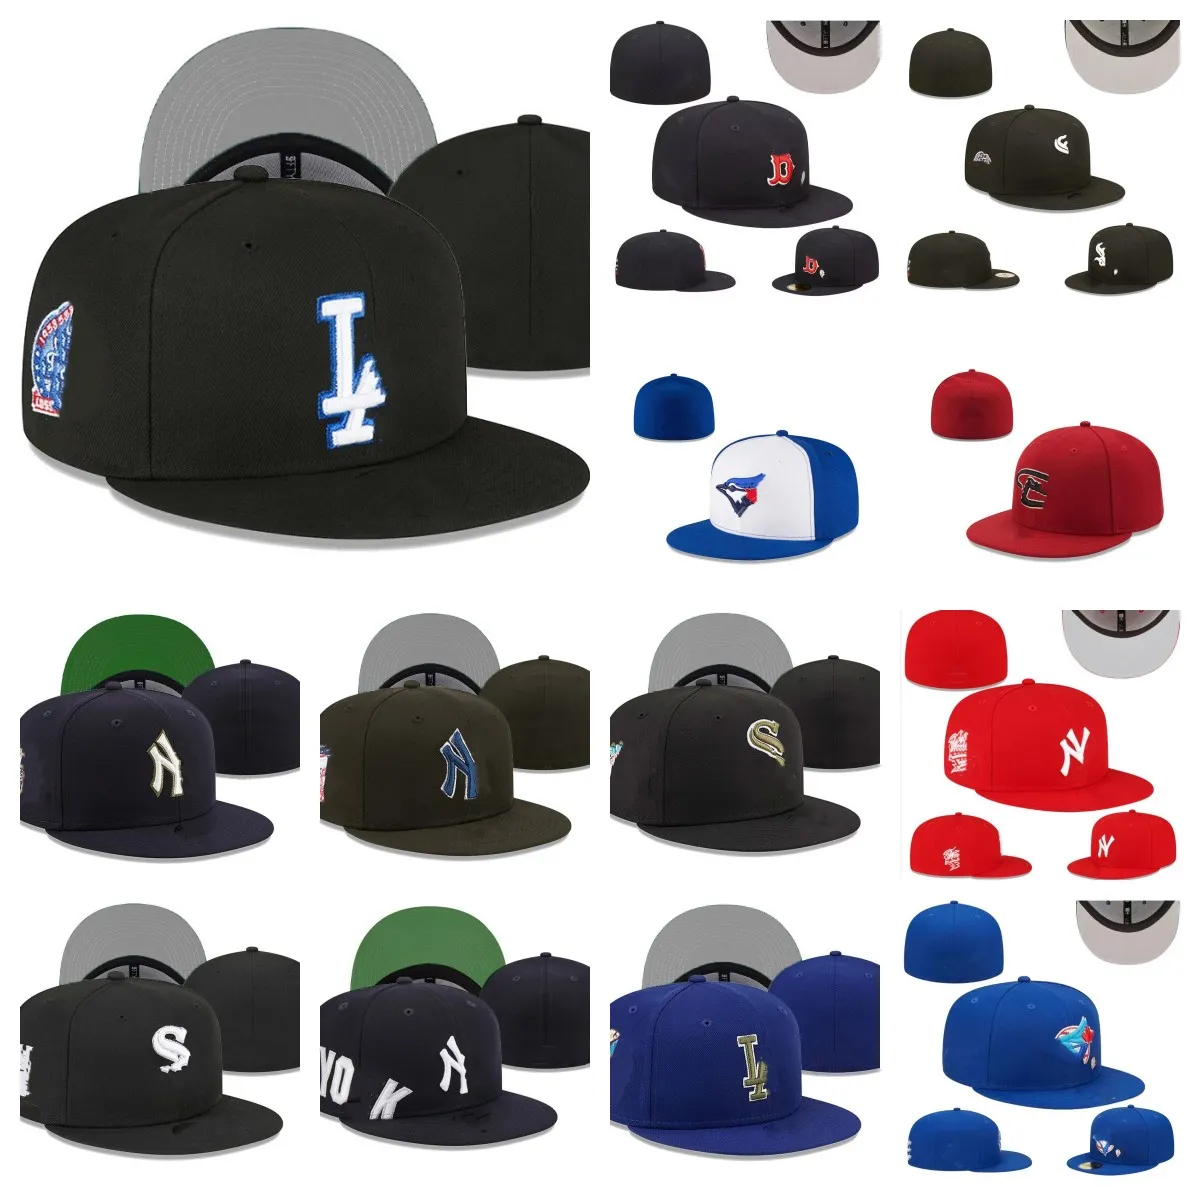 Newest Fitted hats Snapbacks ball Designer Fit hat Embroidery Adjustable Baseball Cotton Caps All Team Outdoor Sports Hip Hop Closed Mesh sun Beanies cap size 7-8